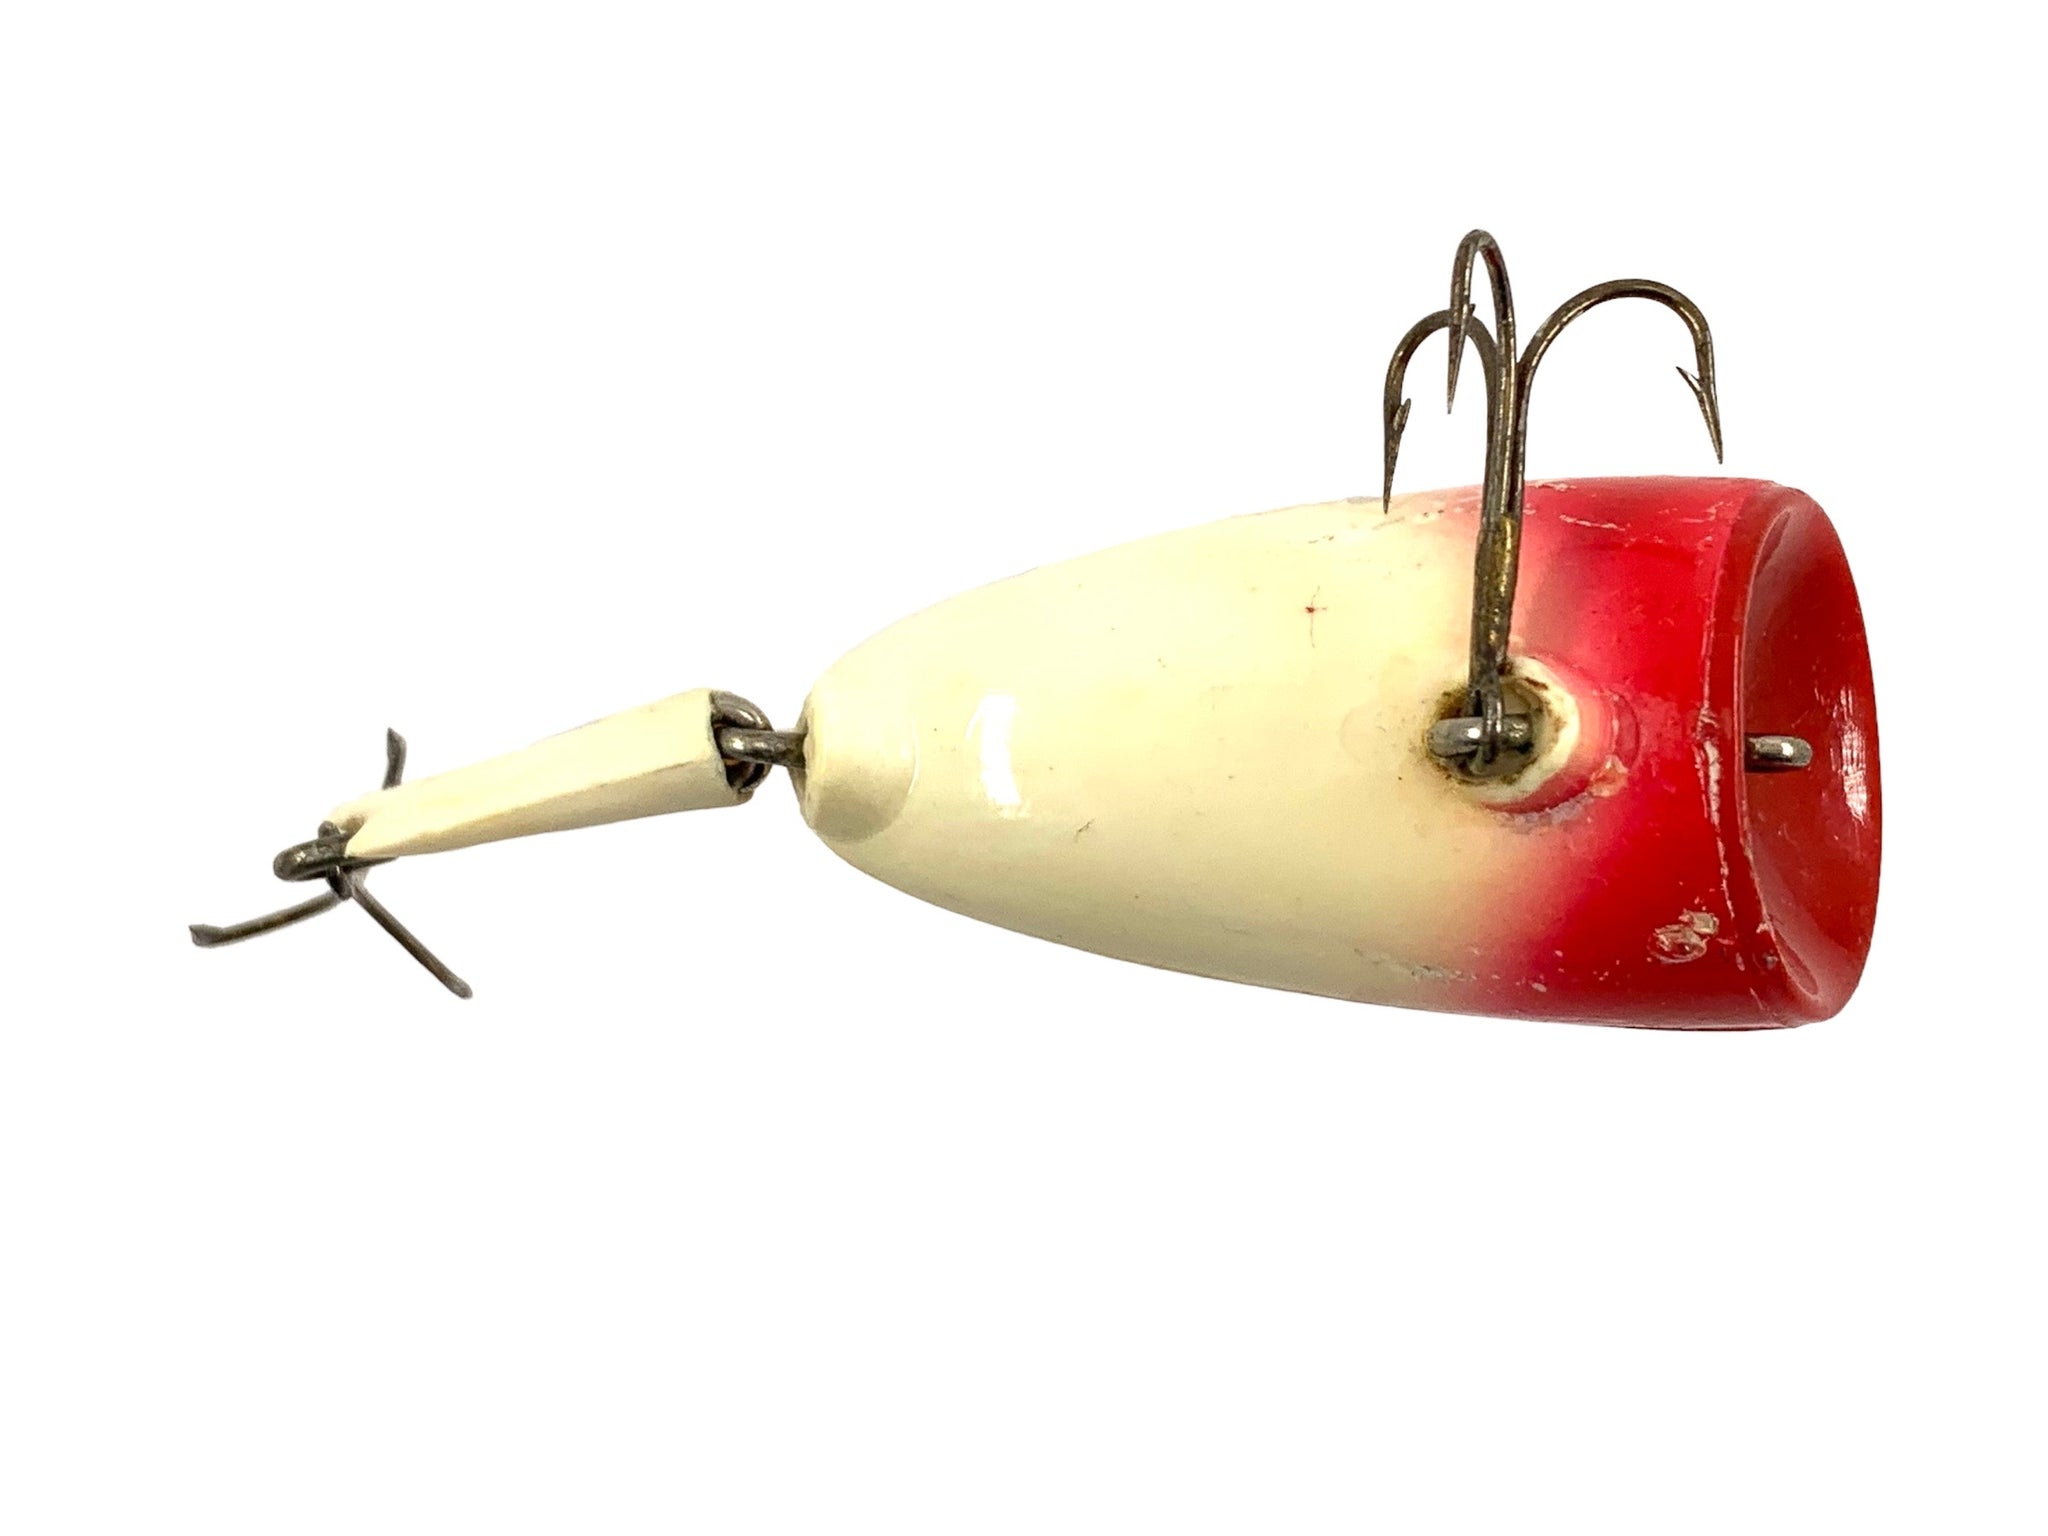 BROOK'S BAITS Jointed Topwater Popper Fishing Lure • J506 RED HEAD